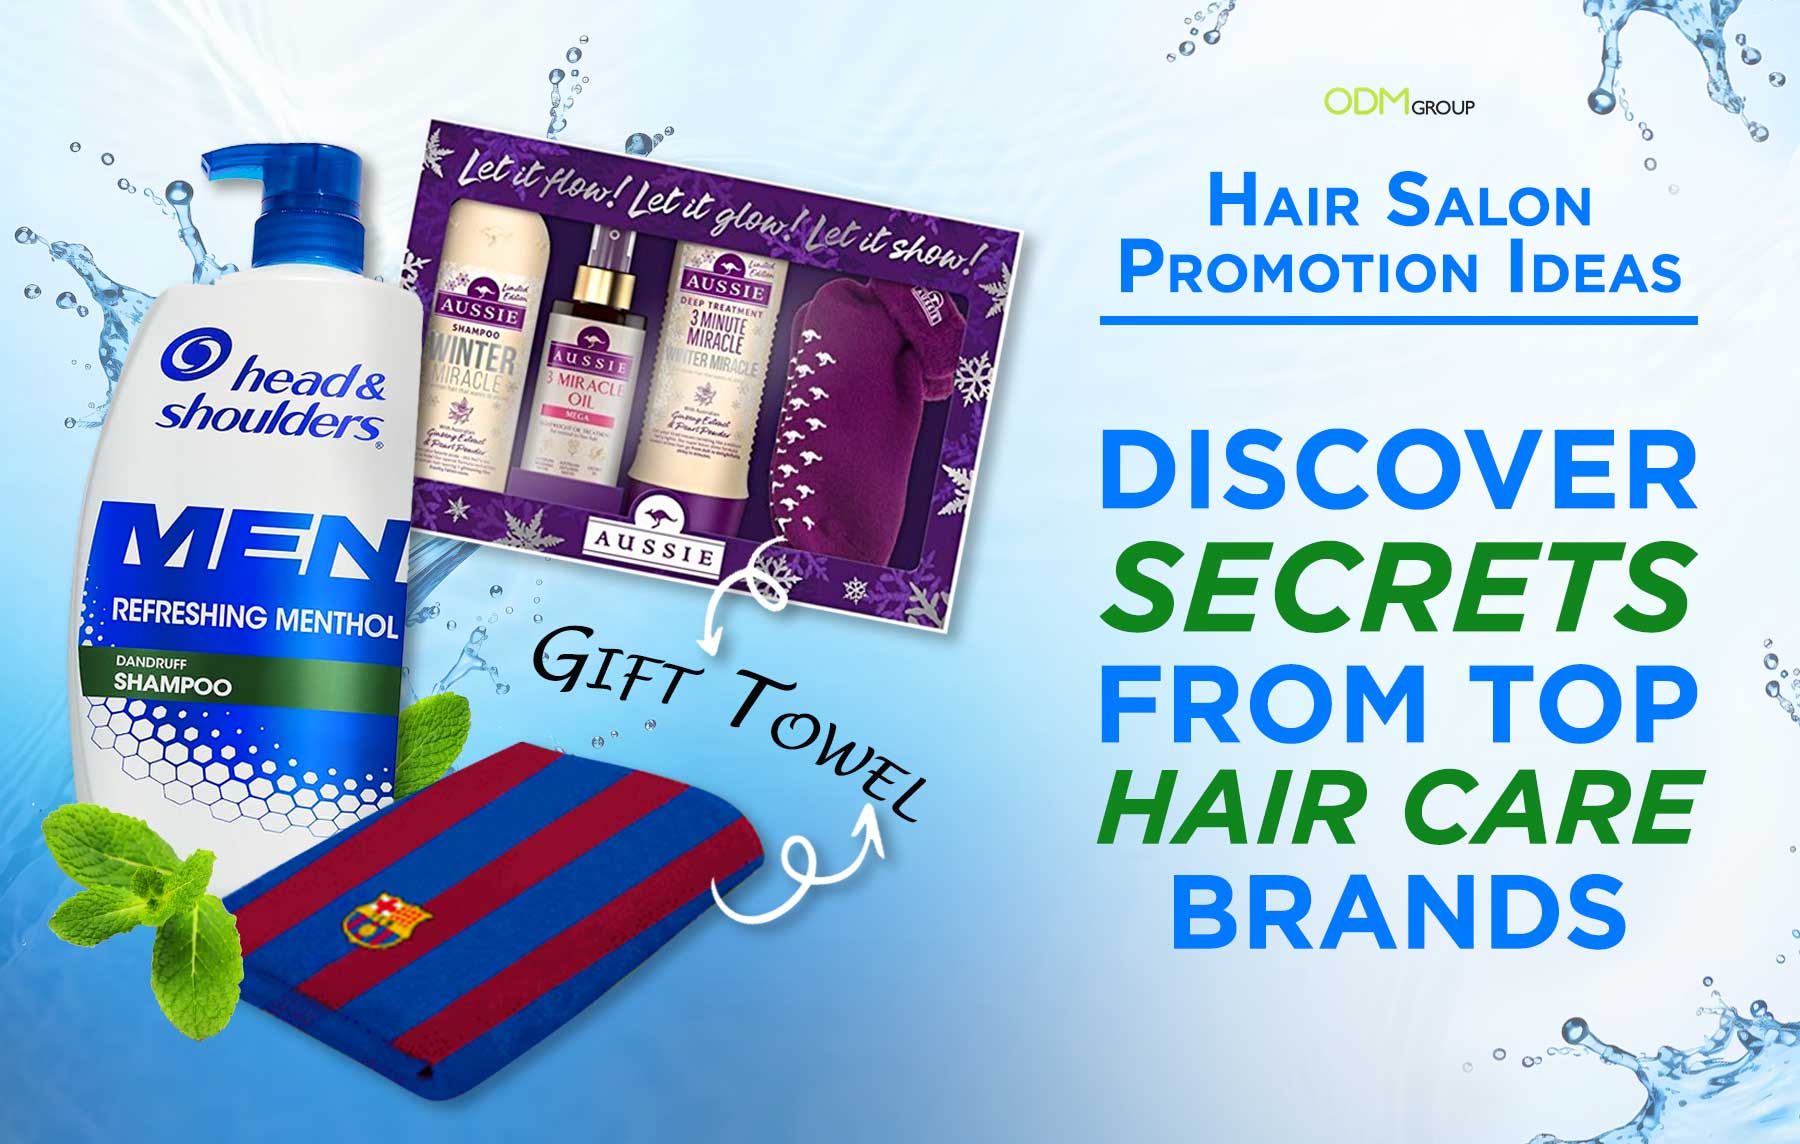 Haircare sample promotions